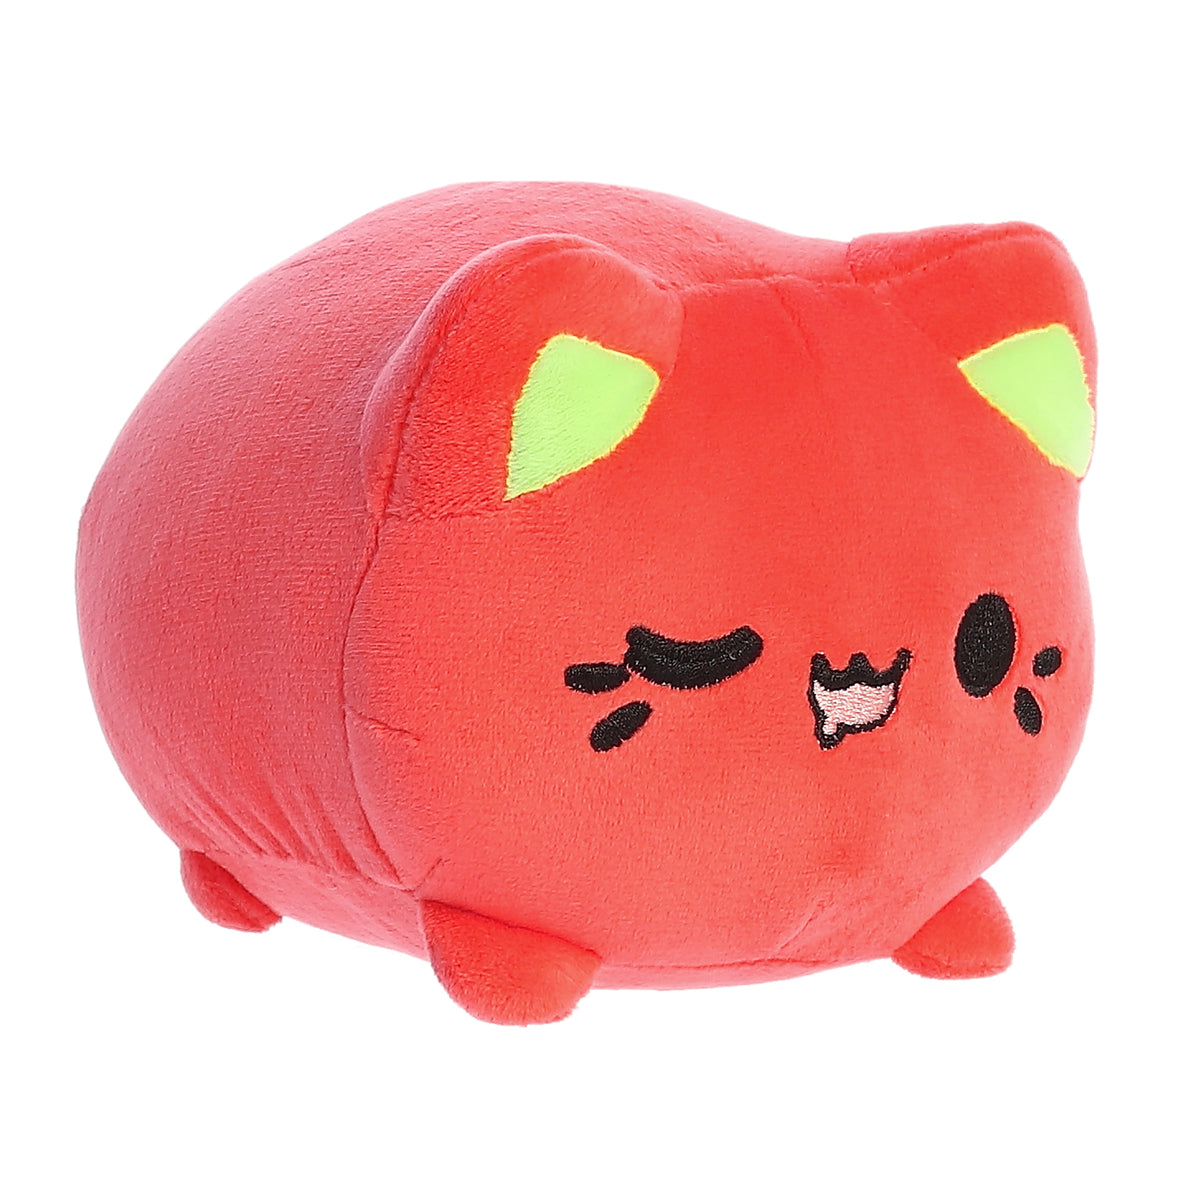 A red Tasty Peach Meowchi plush that is a round cylinder shape with the resemblance of an animated winking cat.